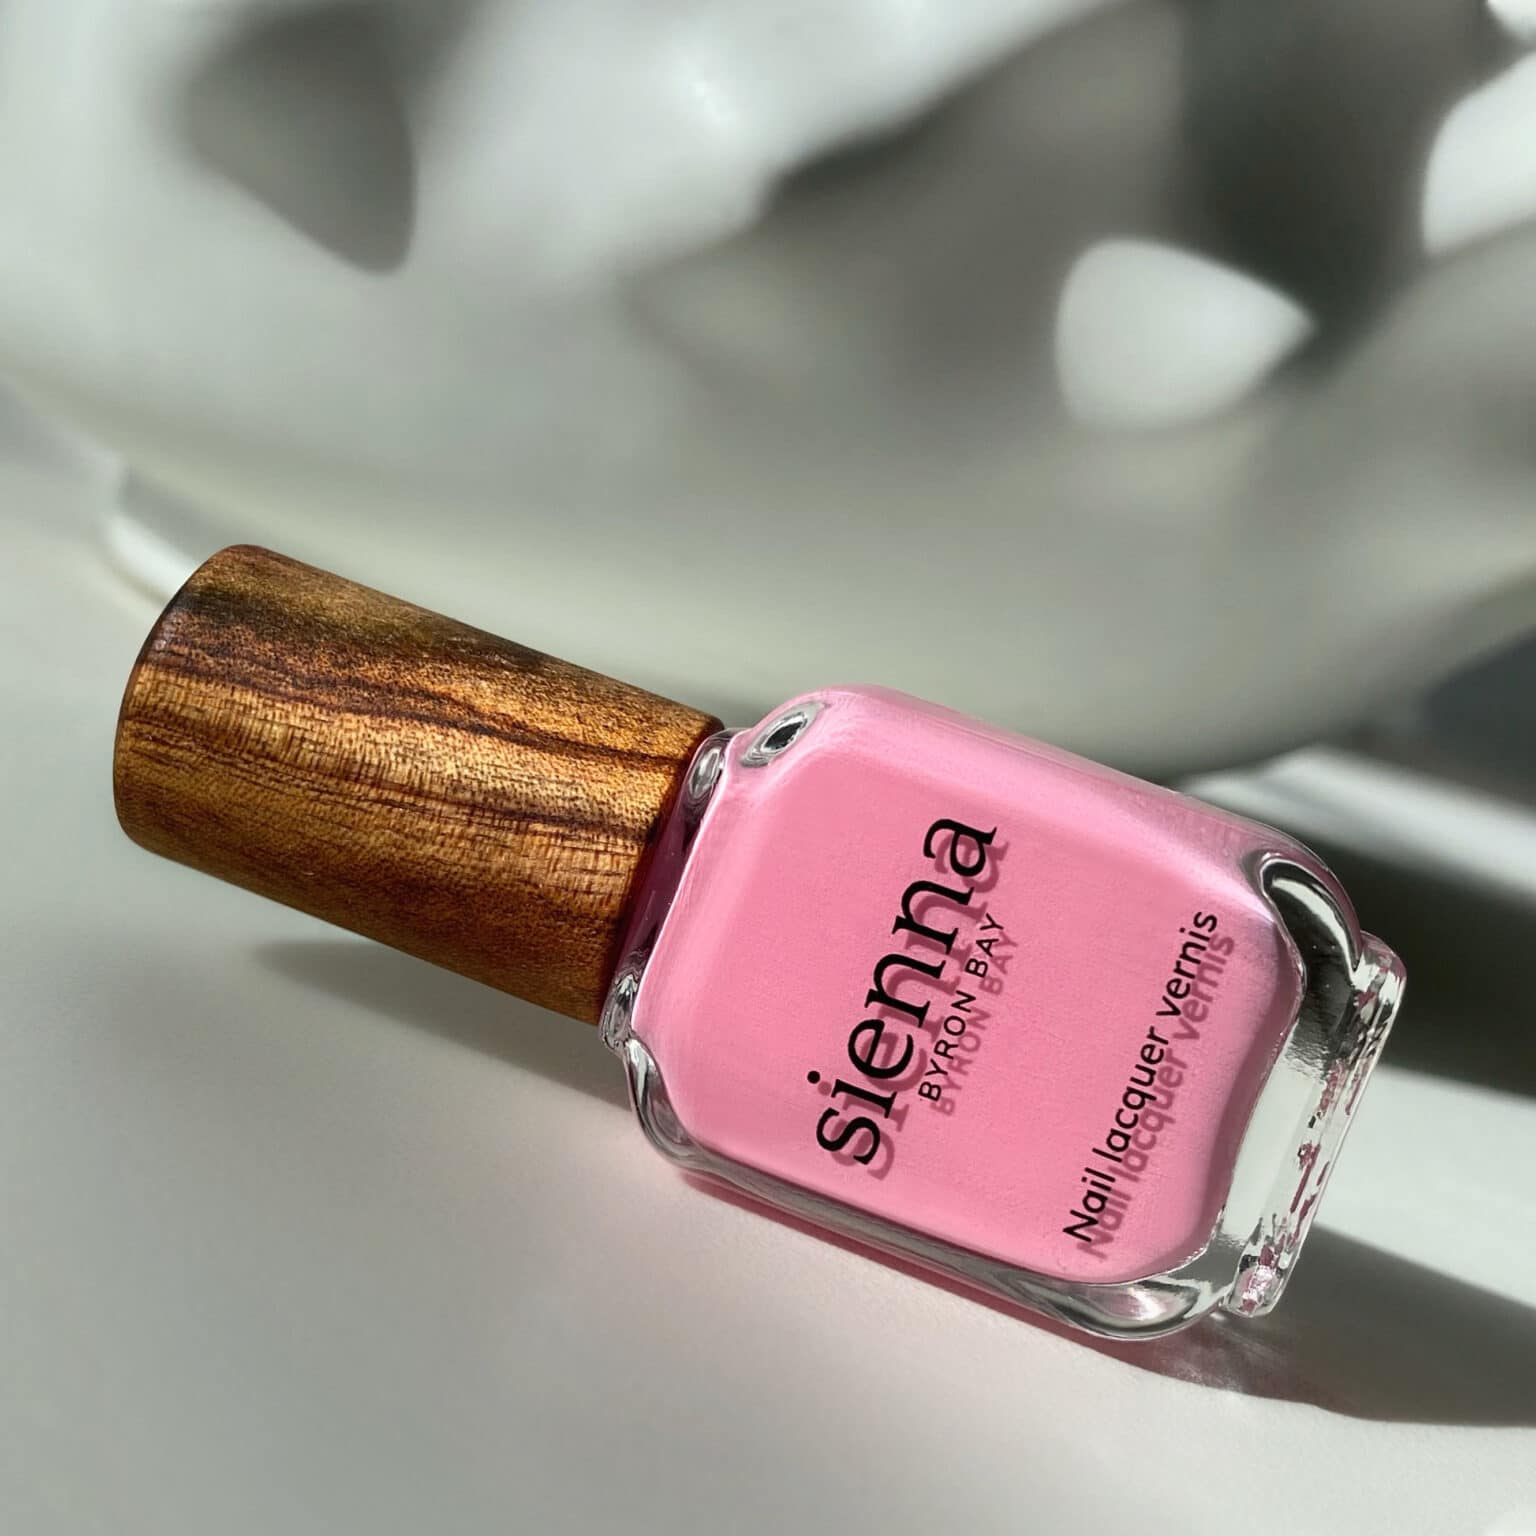 classic pink nail polish bottle with timber cap by sienna